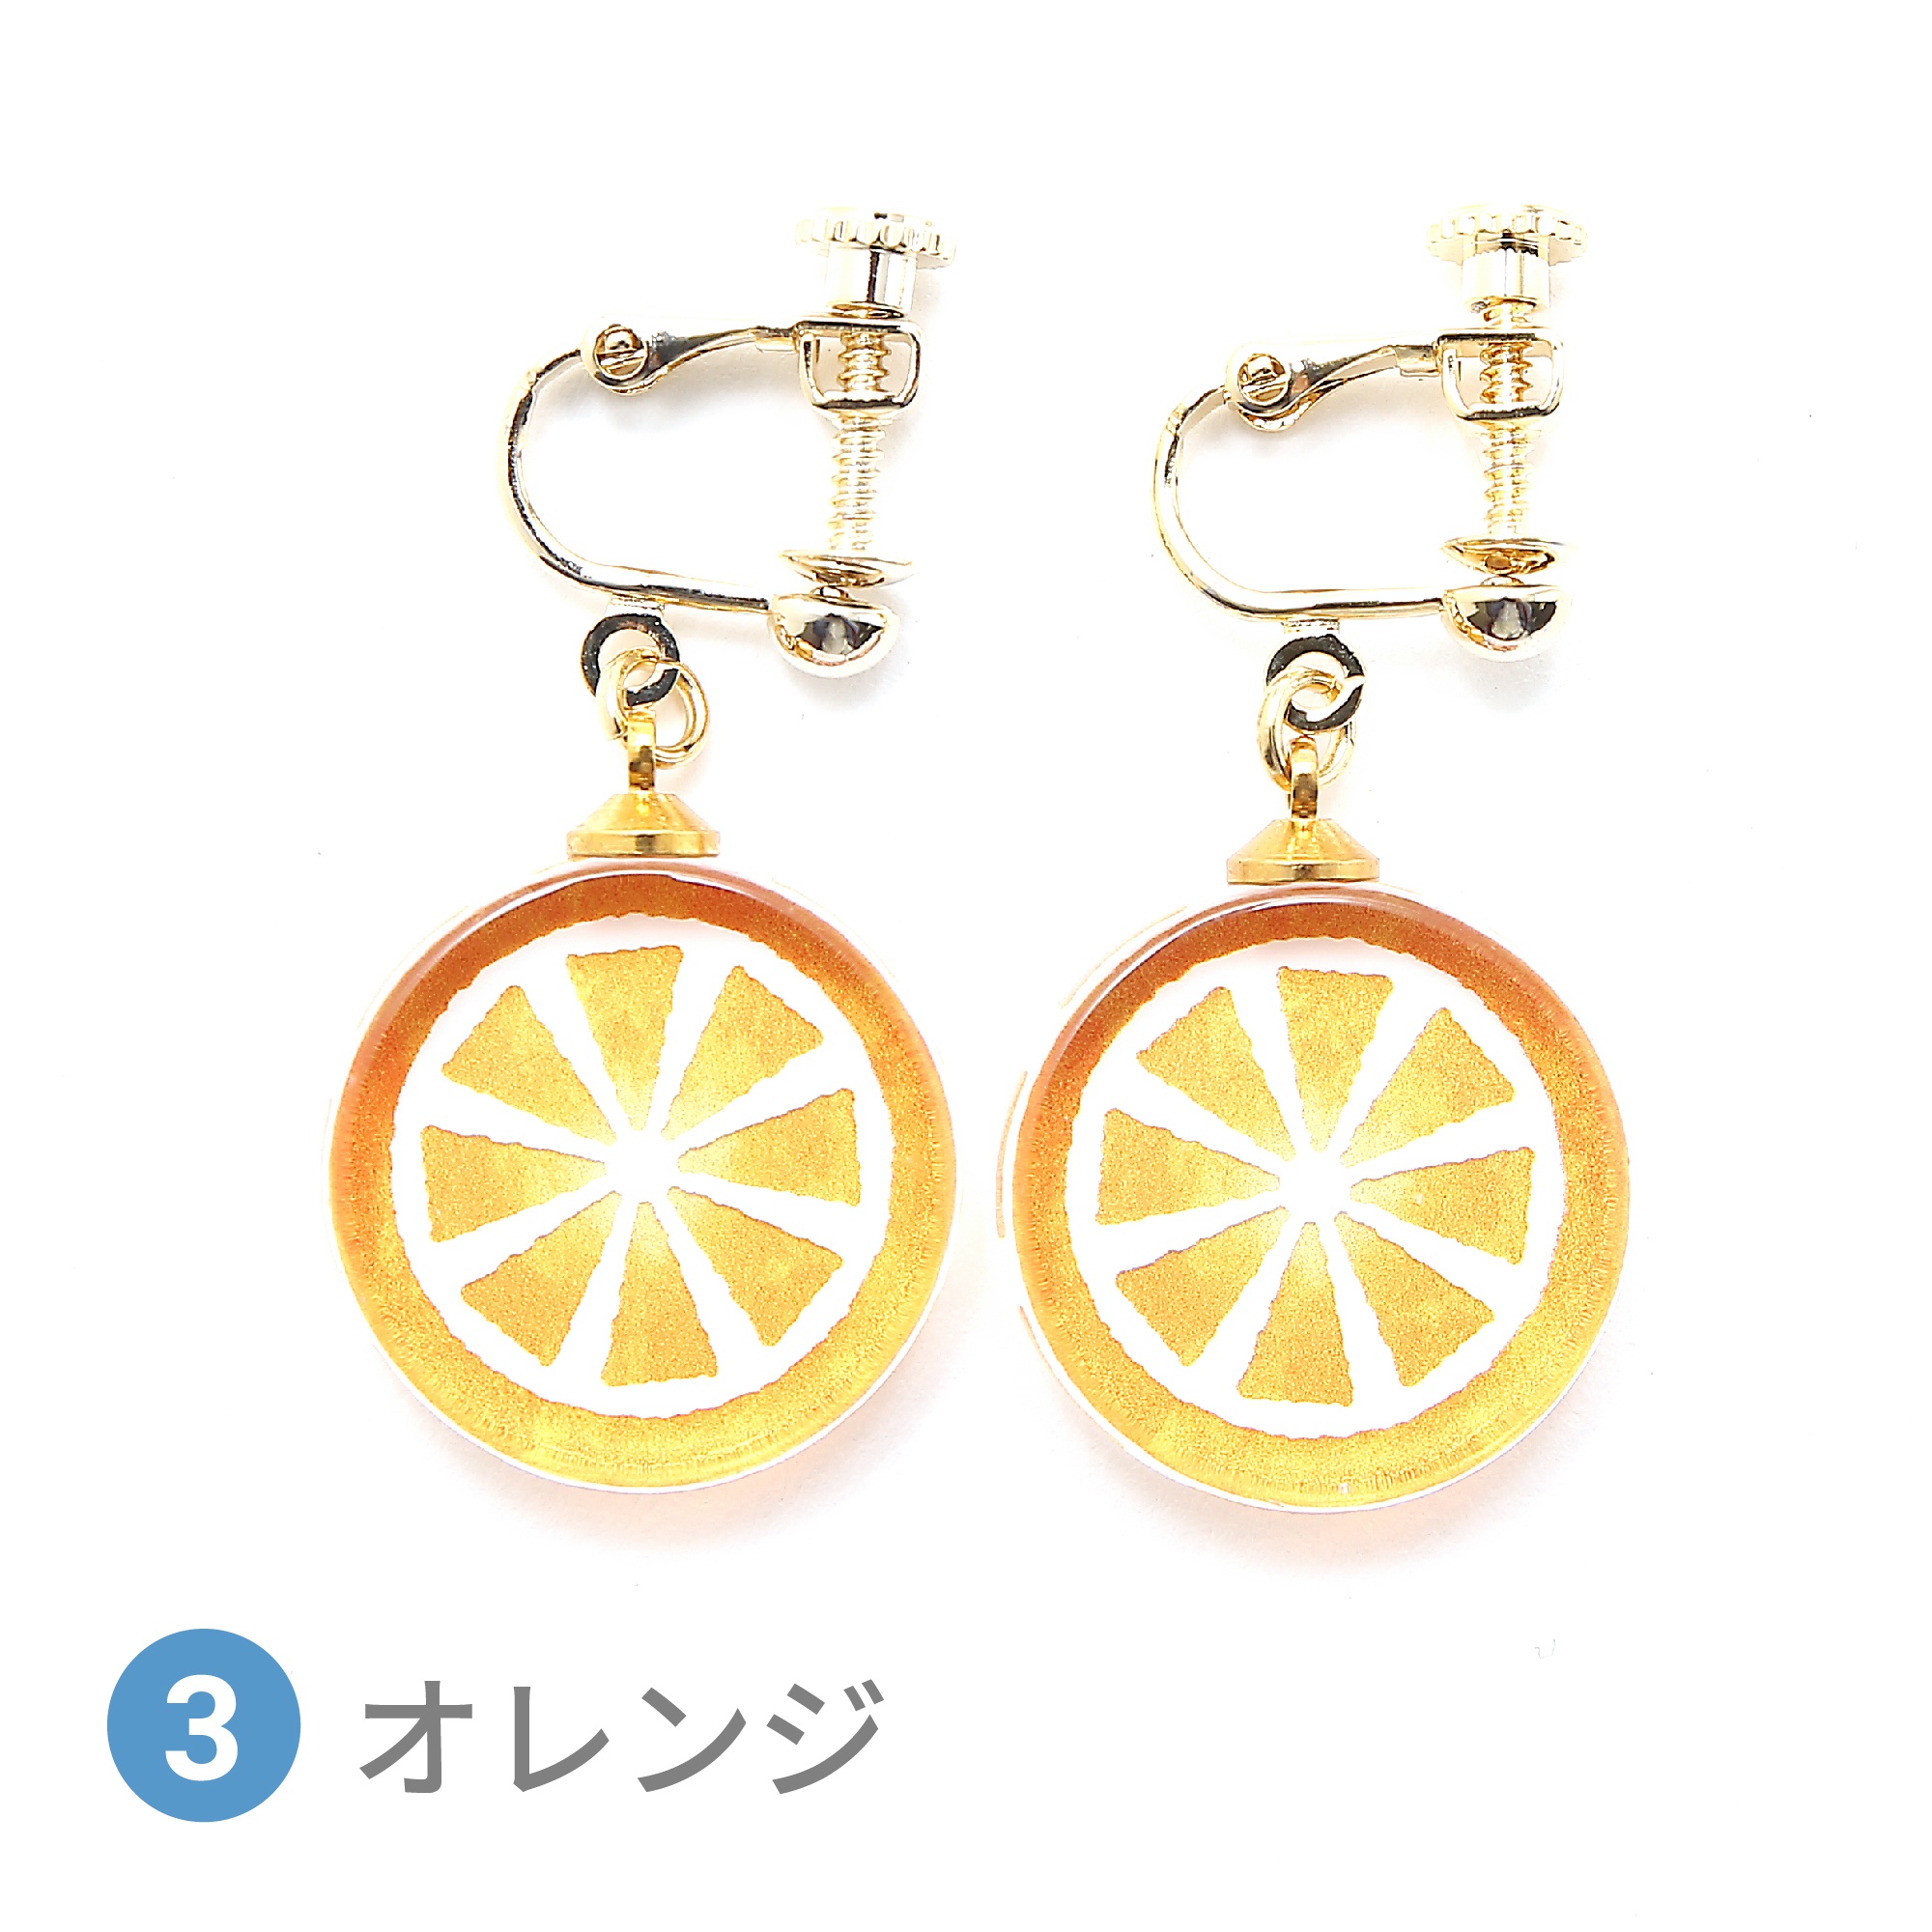 Glass accessories Earring candy orange round shape